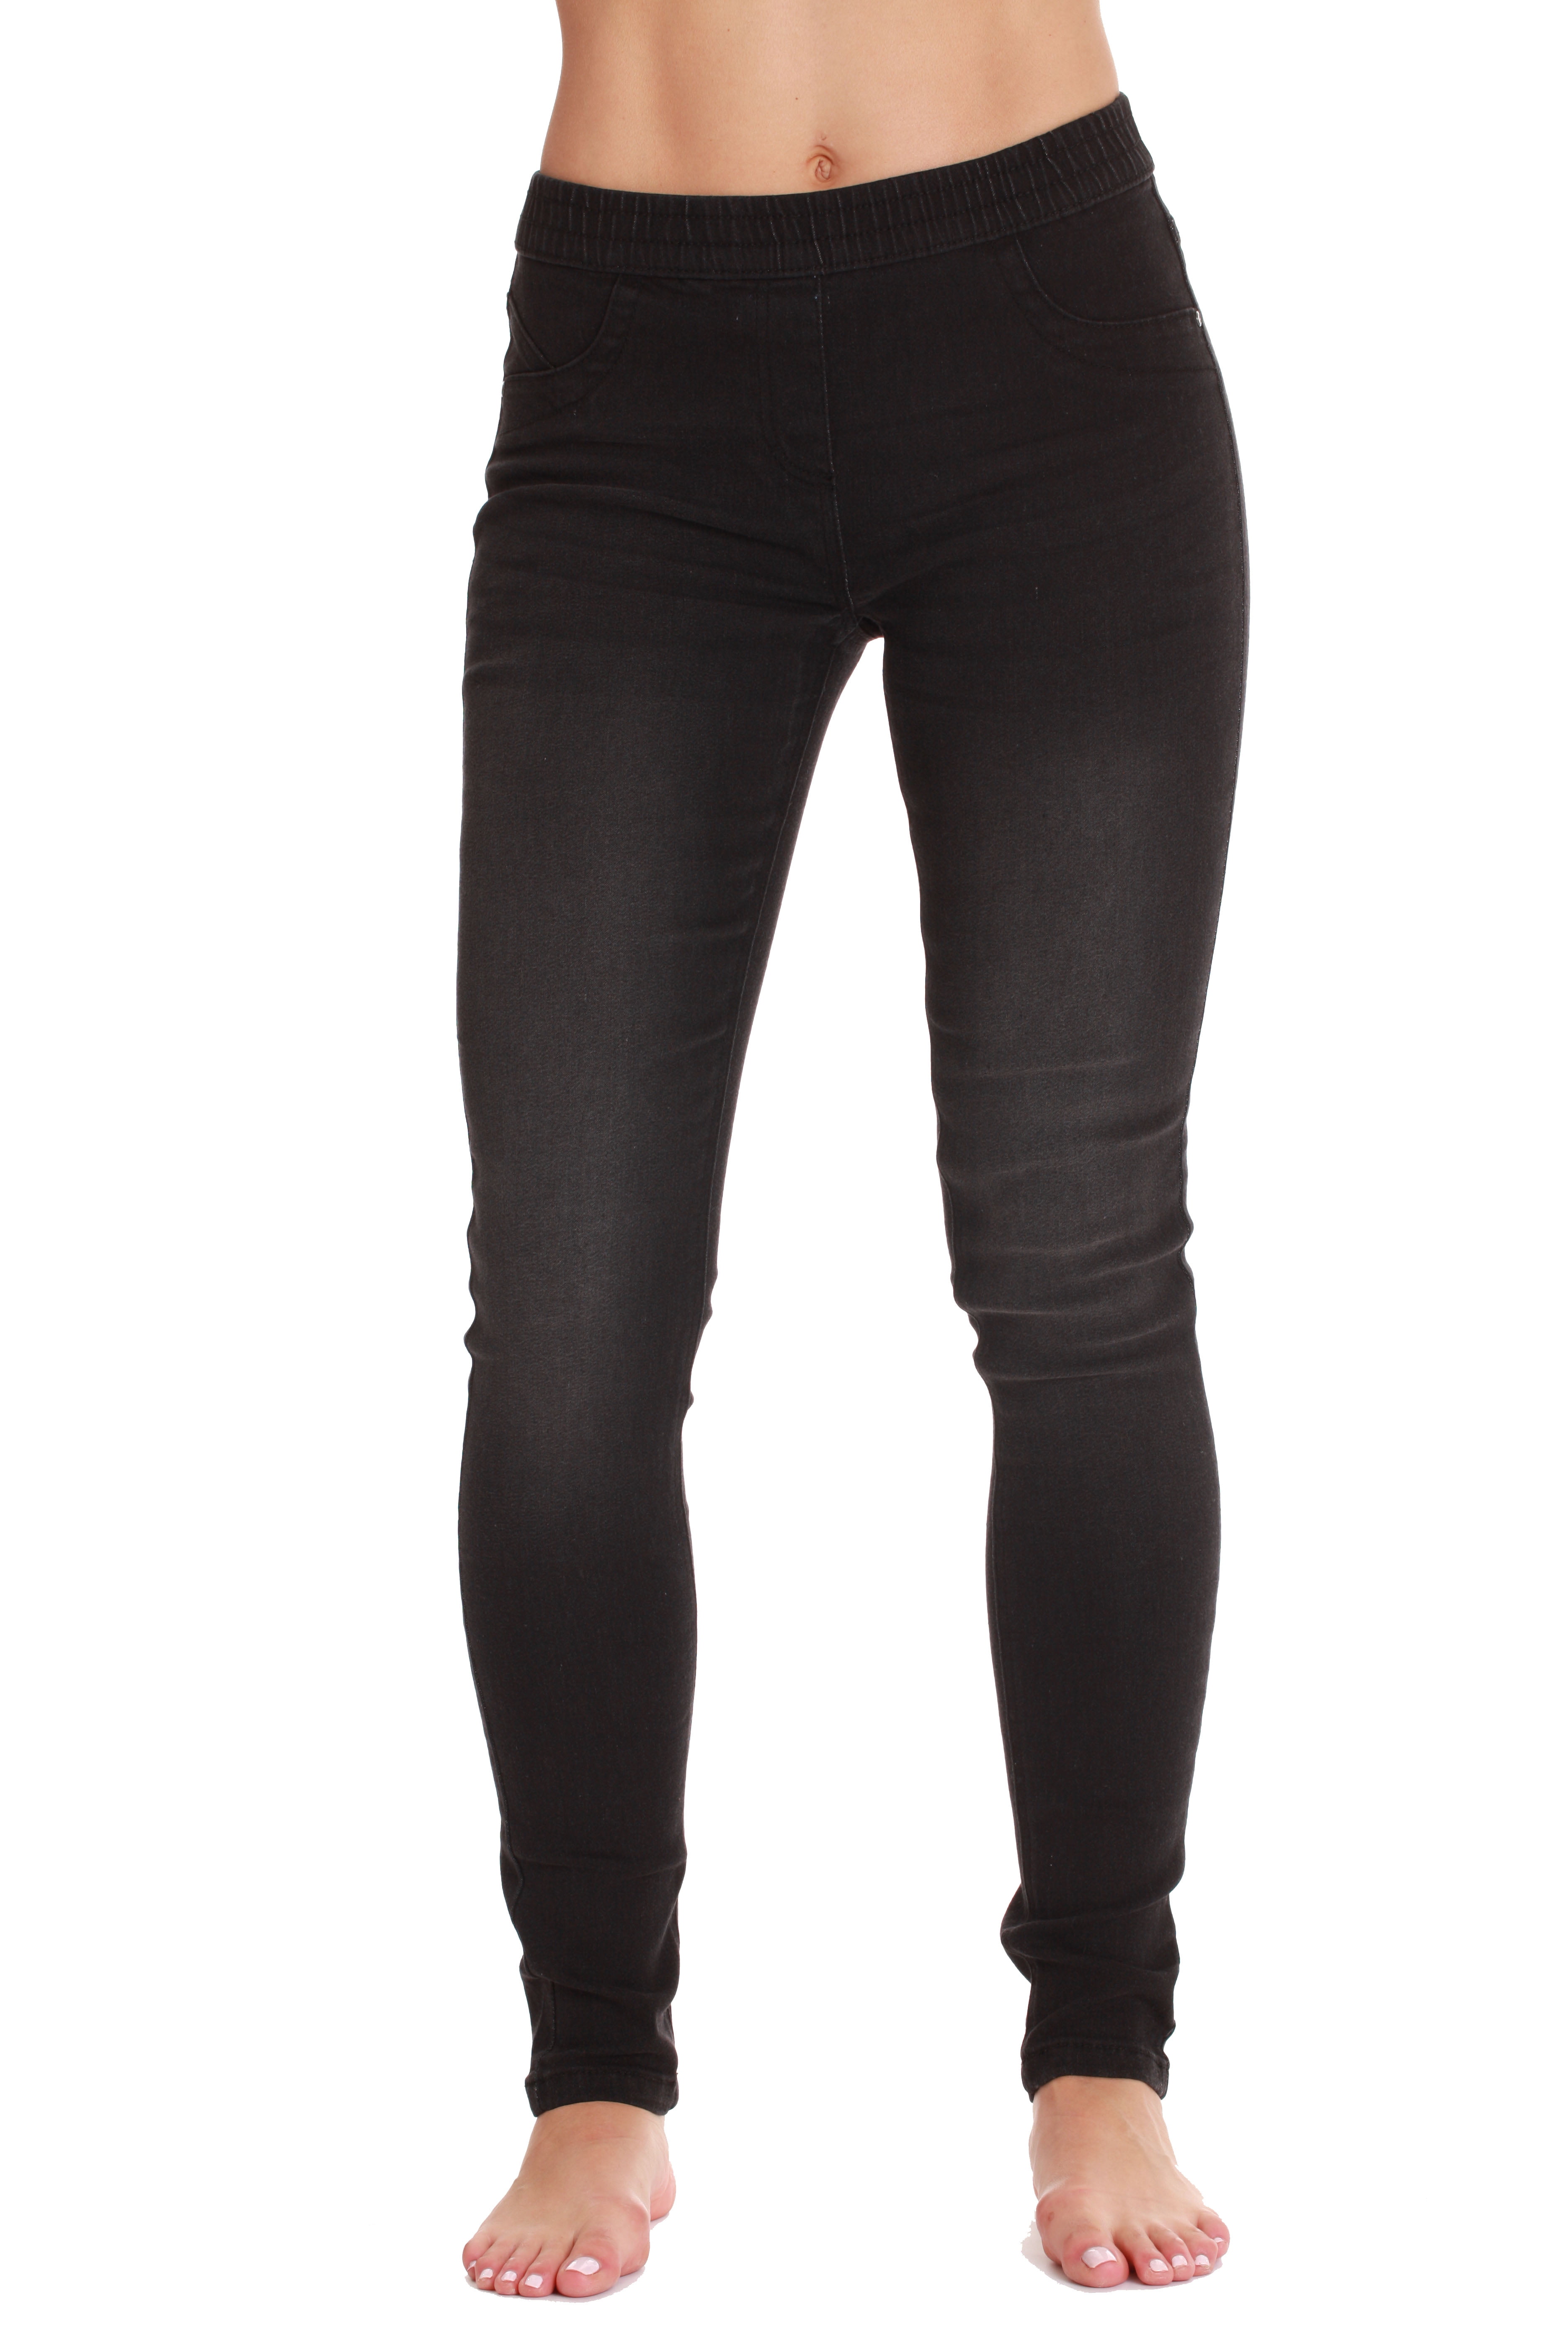 Jean Leggings With Pockets  International Society of Precision Agriculture